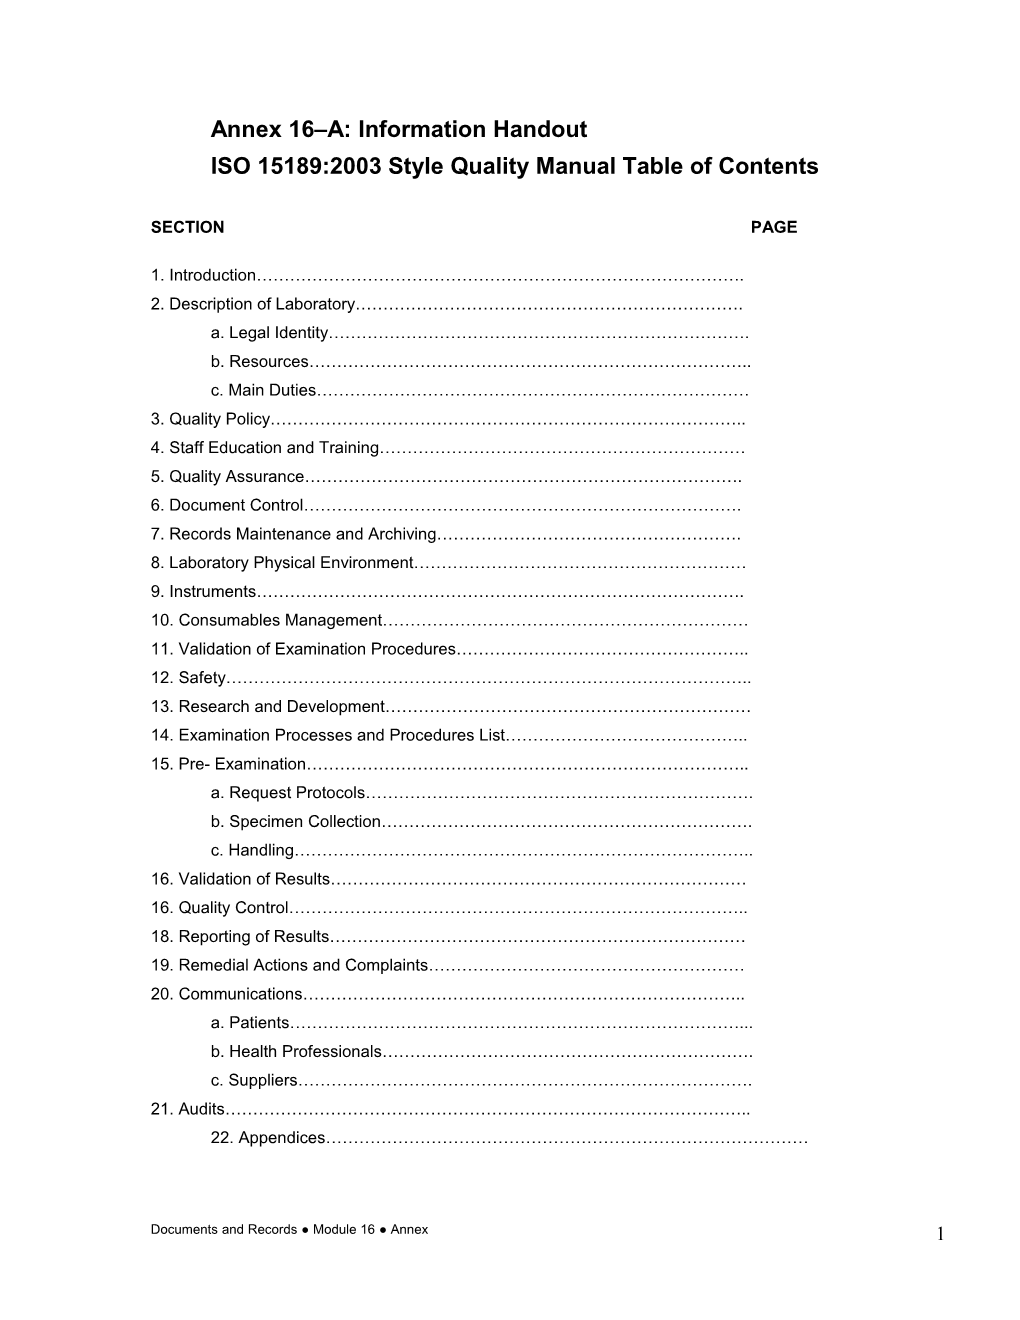 ISO 15189:2003 Style Quality Manual Table of Contents